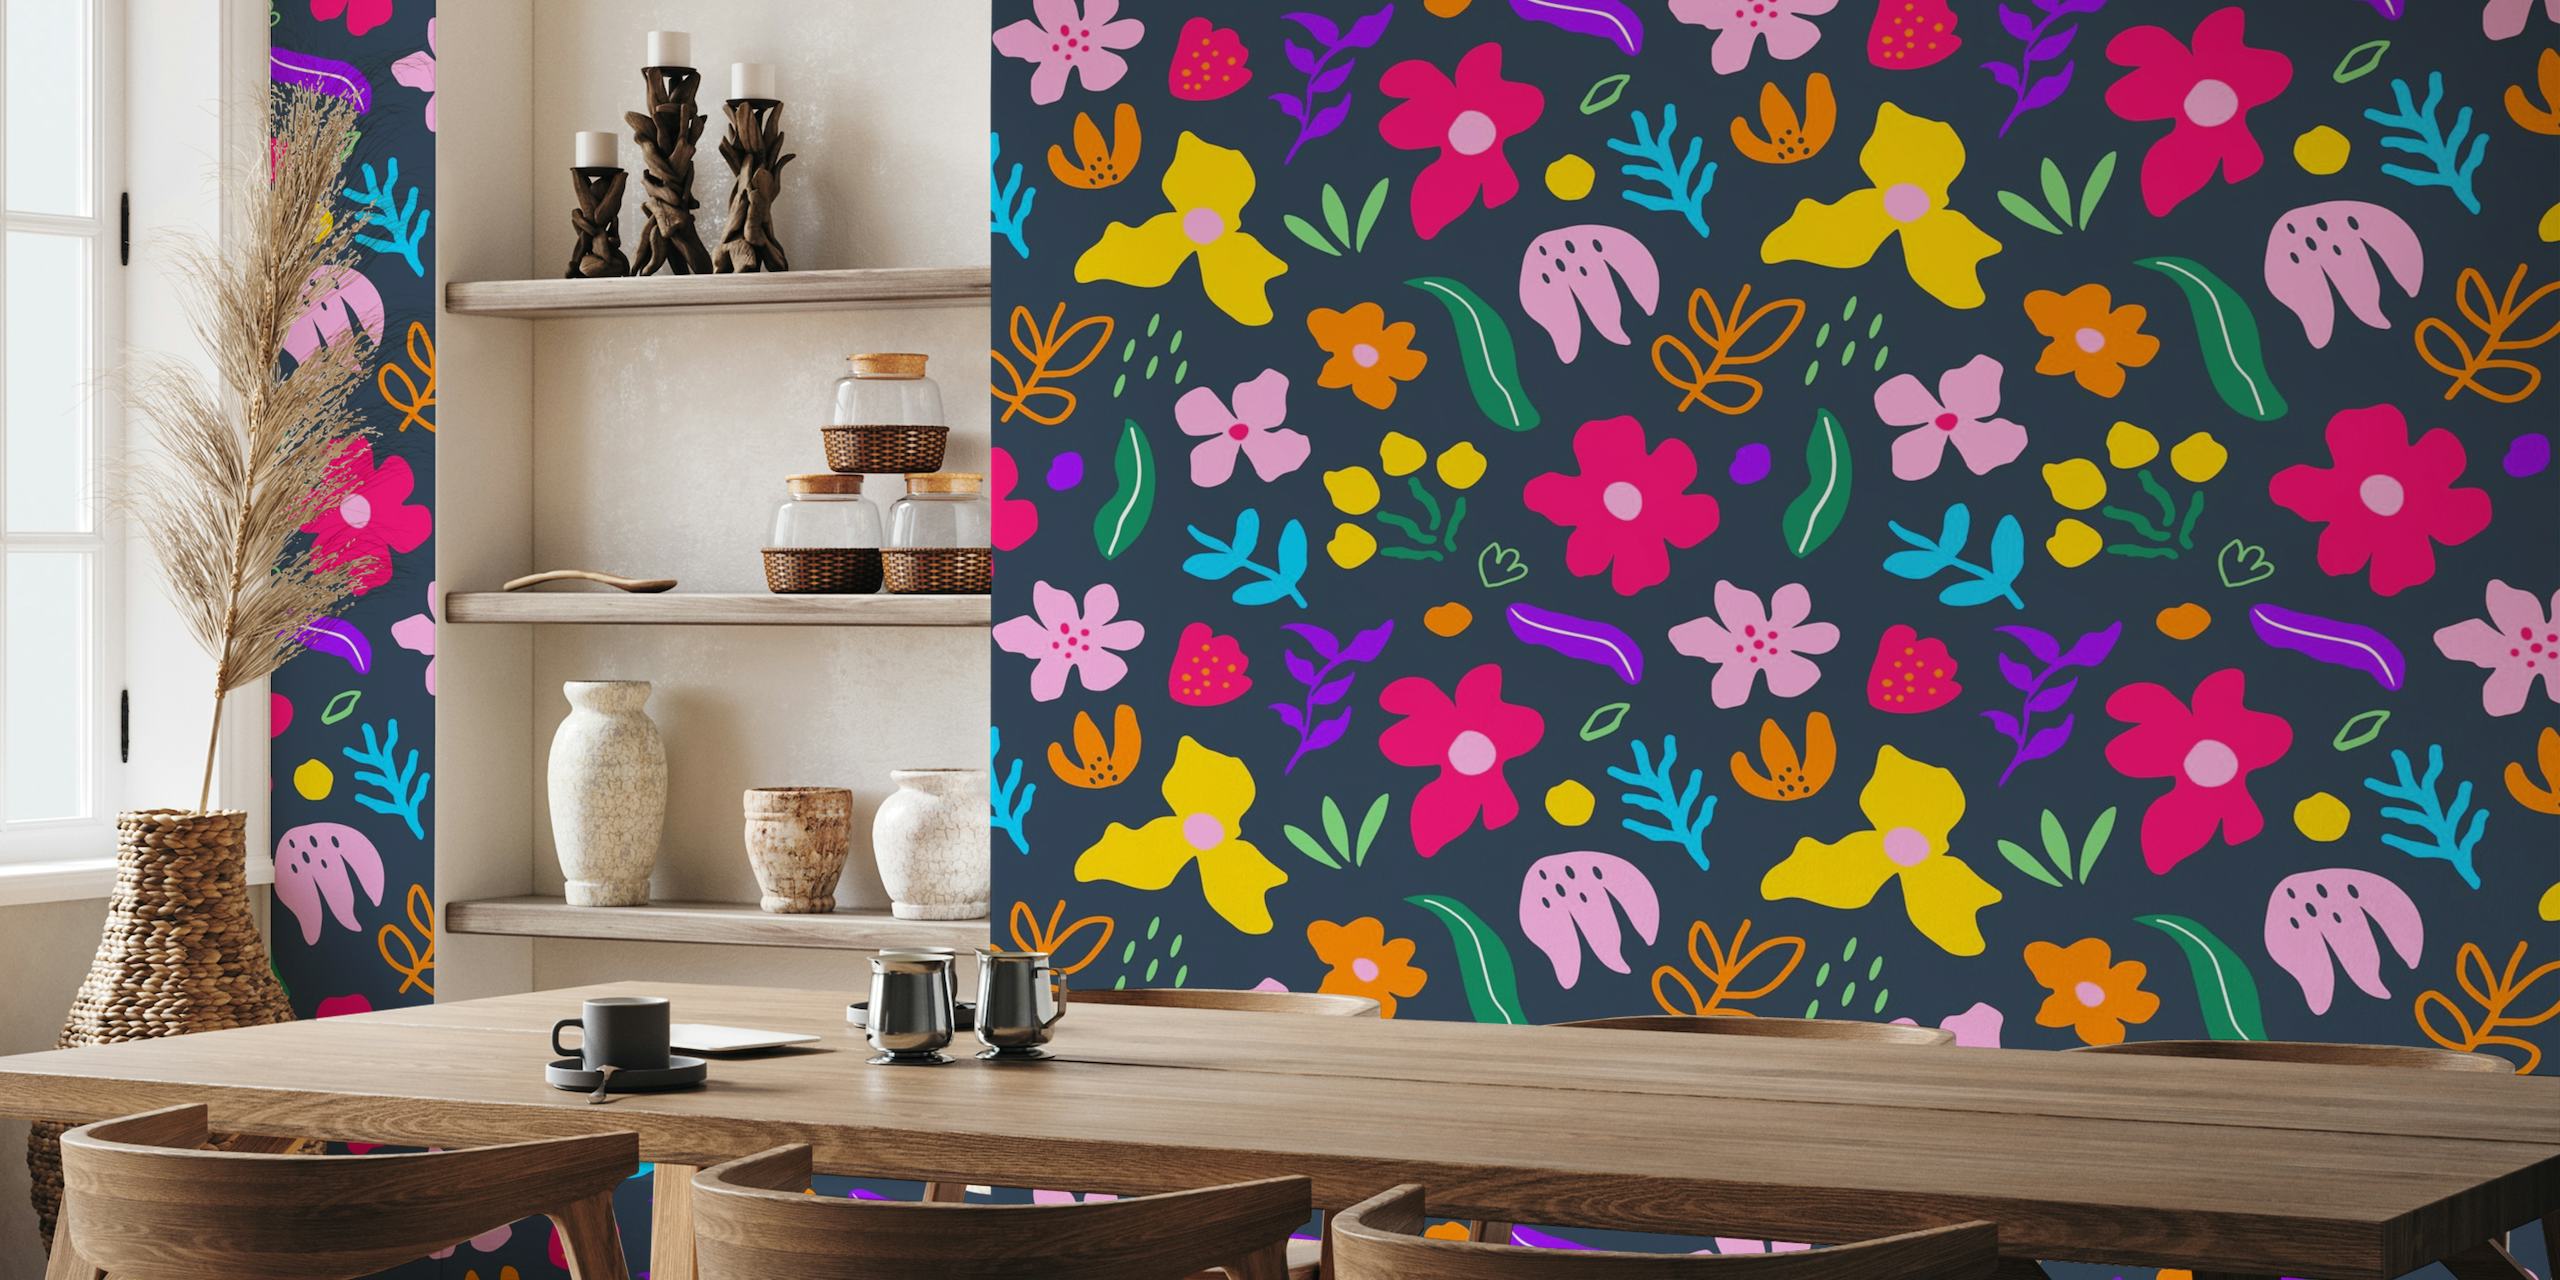 Colorful abstract floral pattern on a navy blue background wall mural